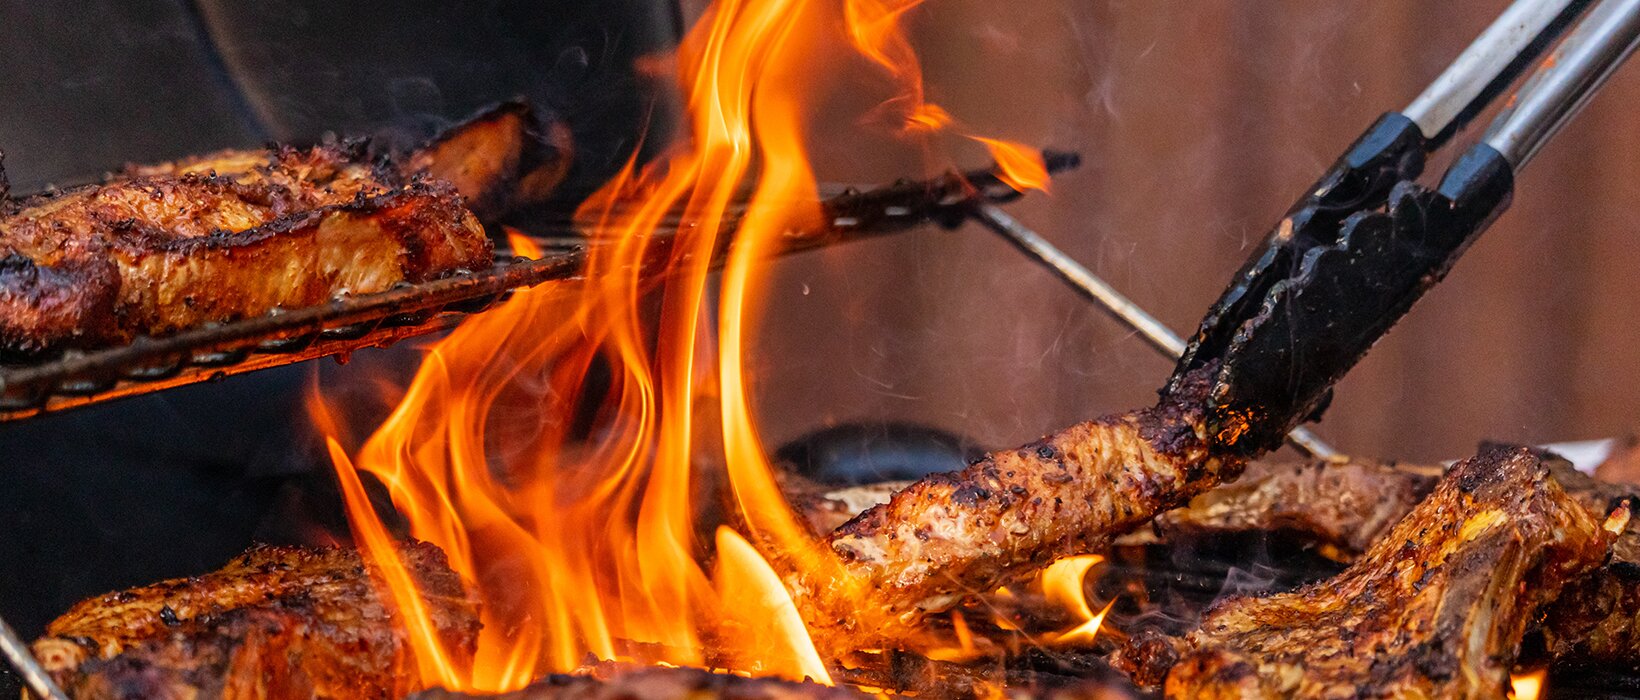 Fire-cooking experts share their tips